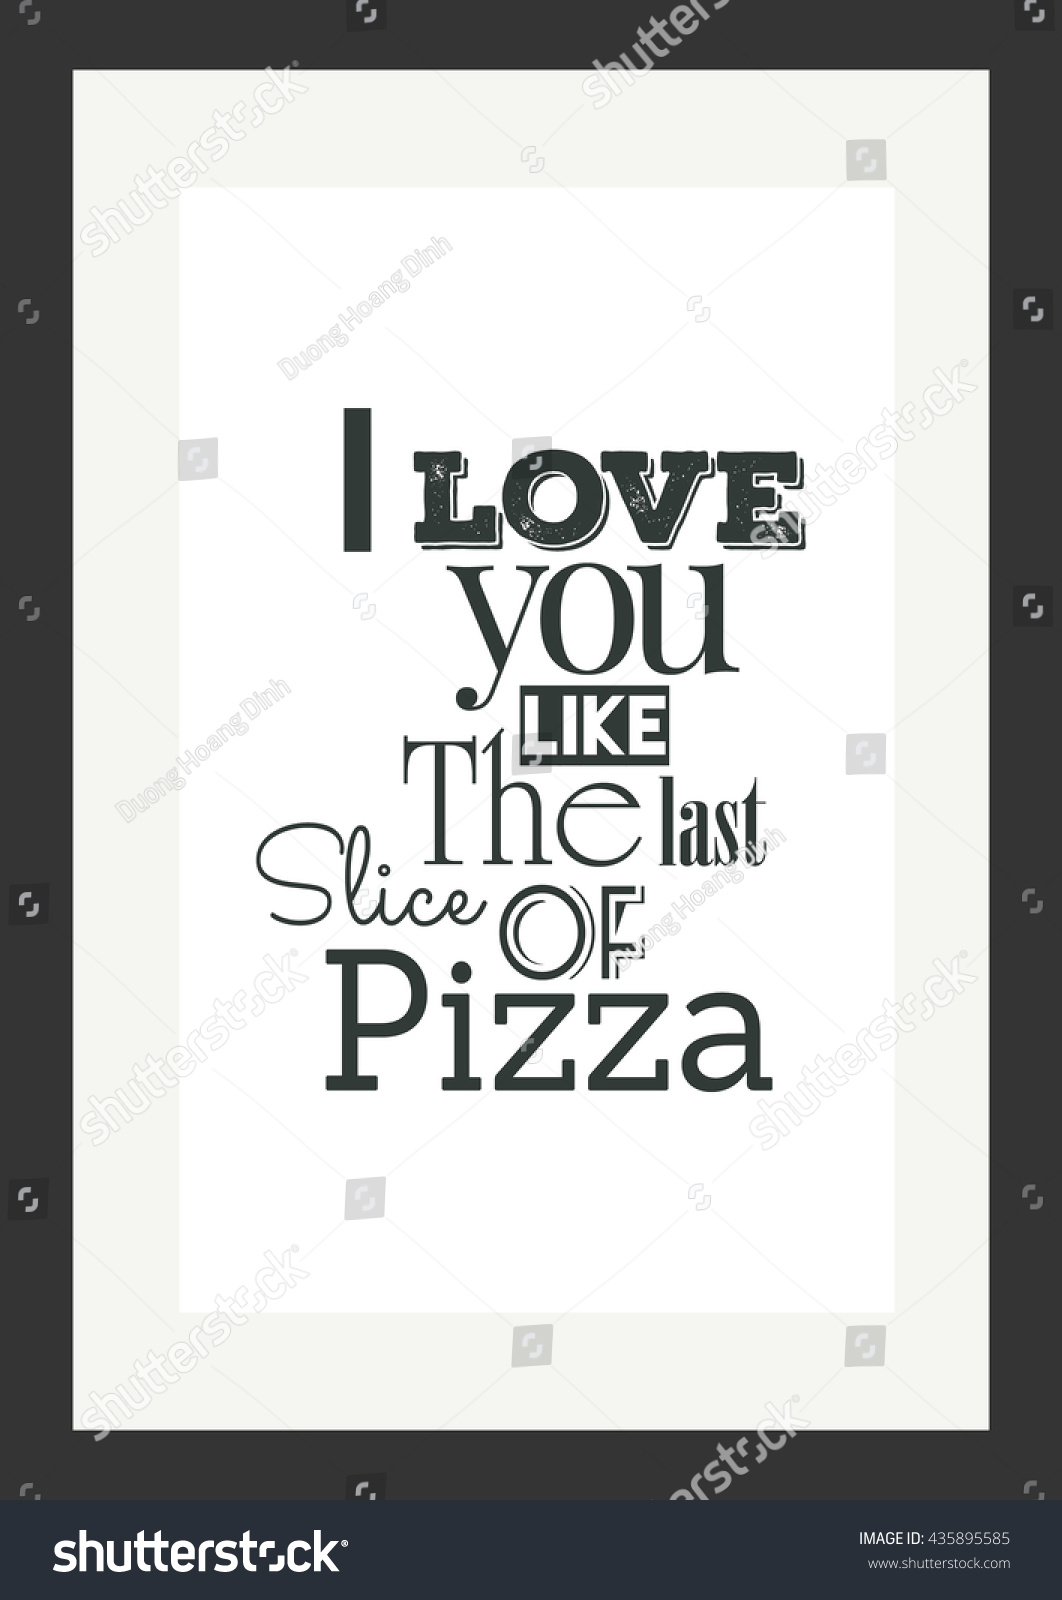 Food quote Pizza quote I love you like the last slice of pizza